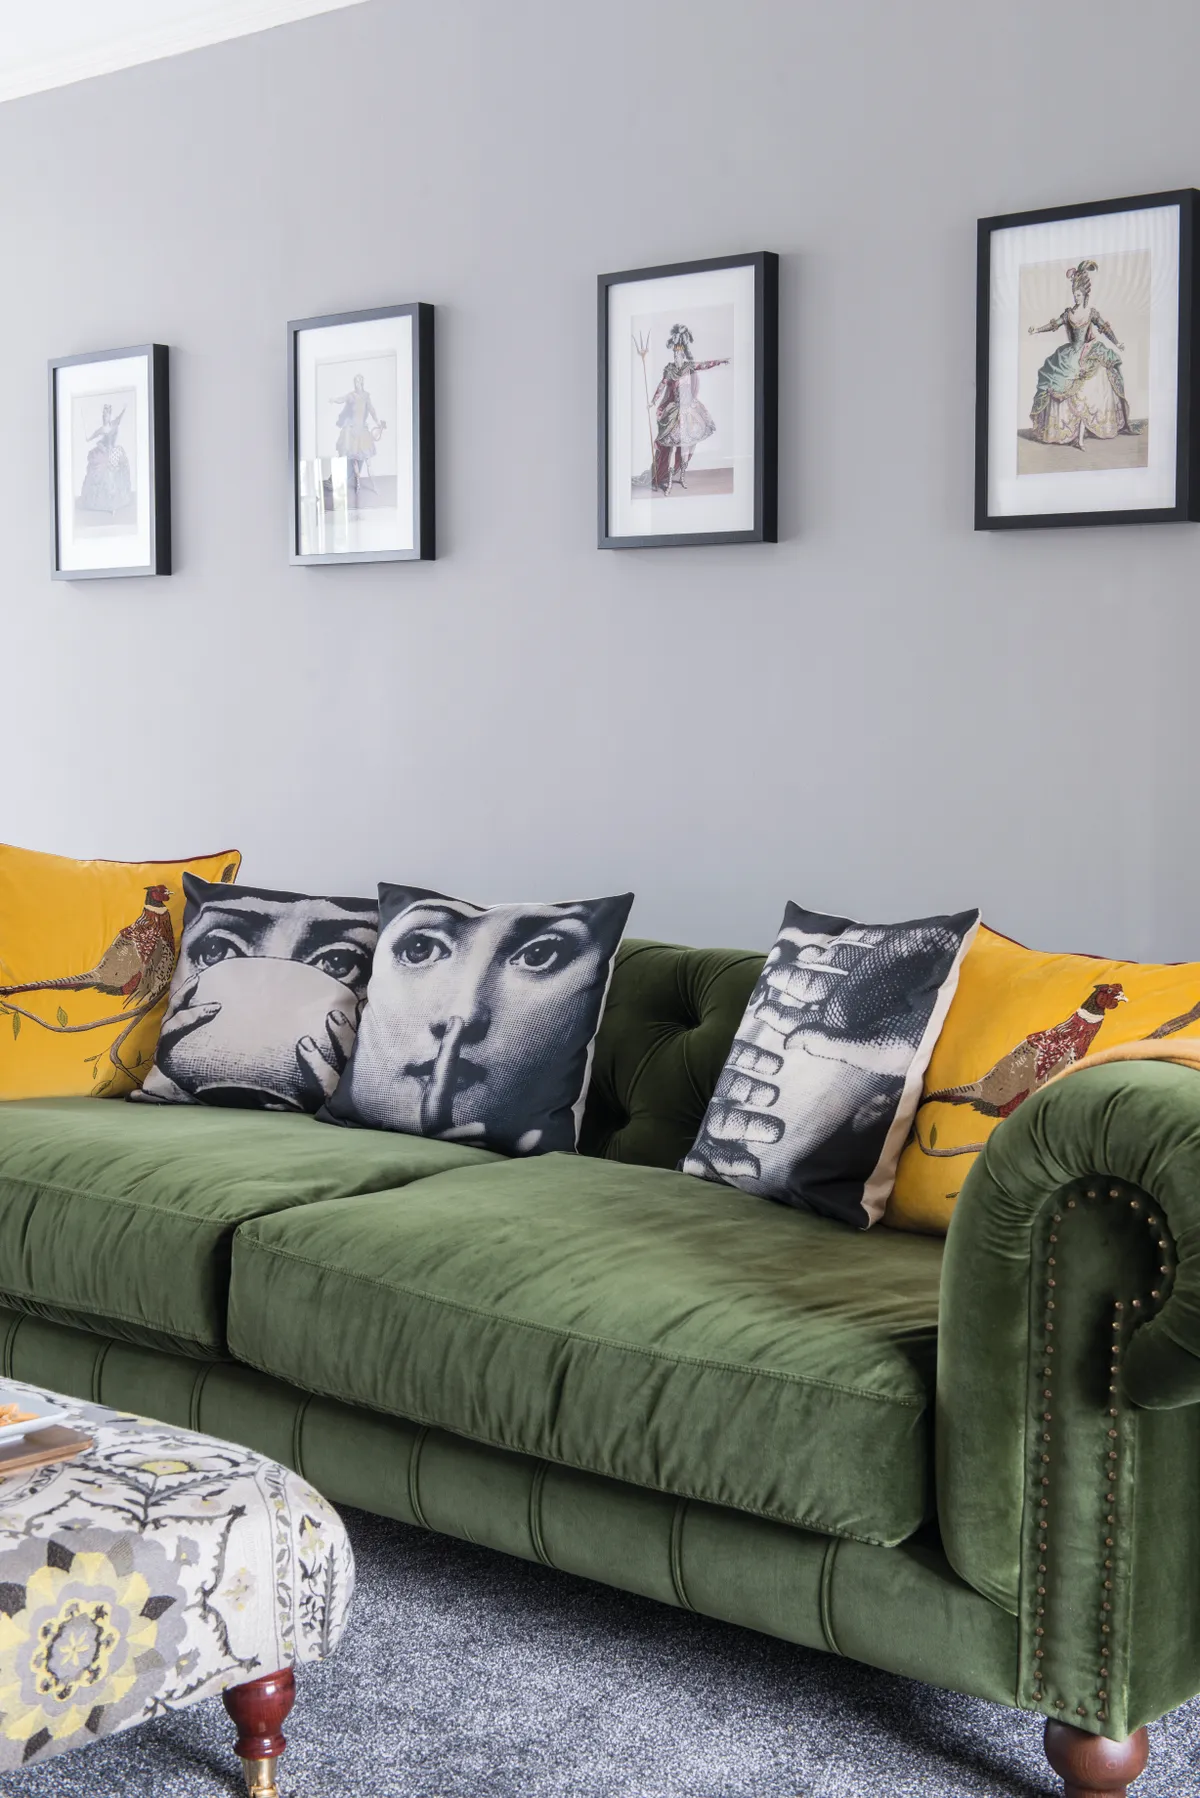 Debra searched carefully to find the pictures of famous opera costumes to frame and for cushions by the artist, Fornasetti, whose designs inspired the wallpaper